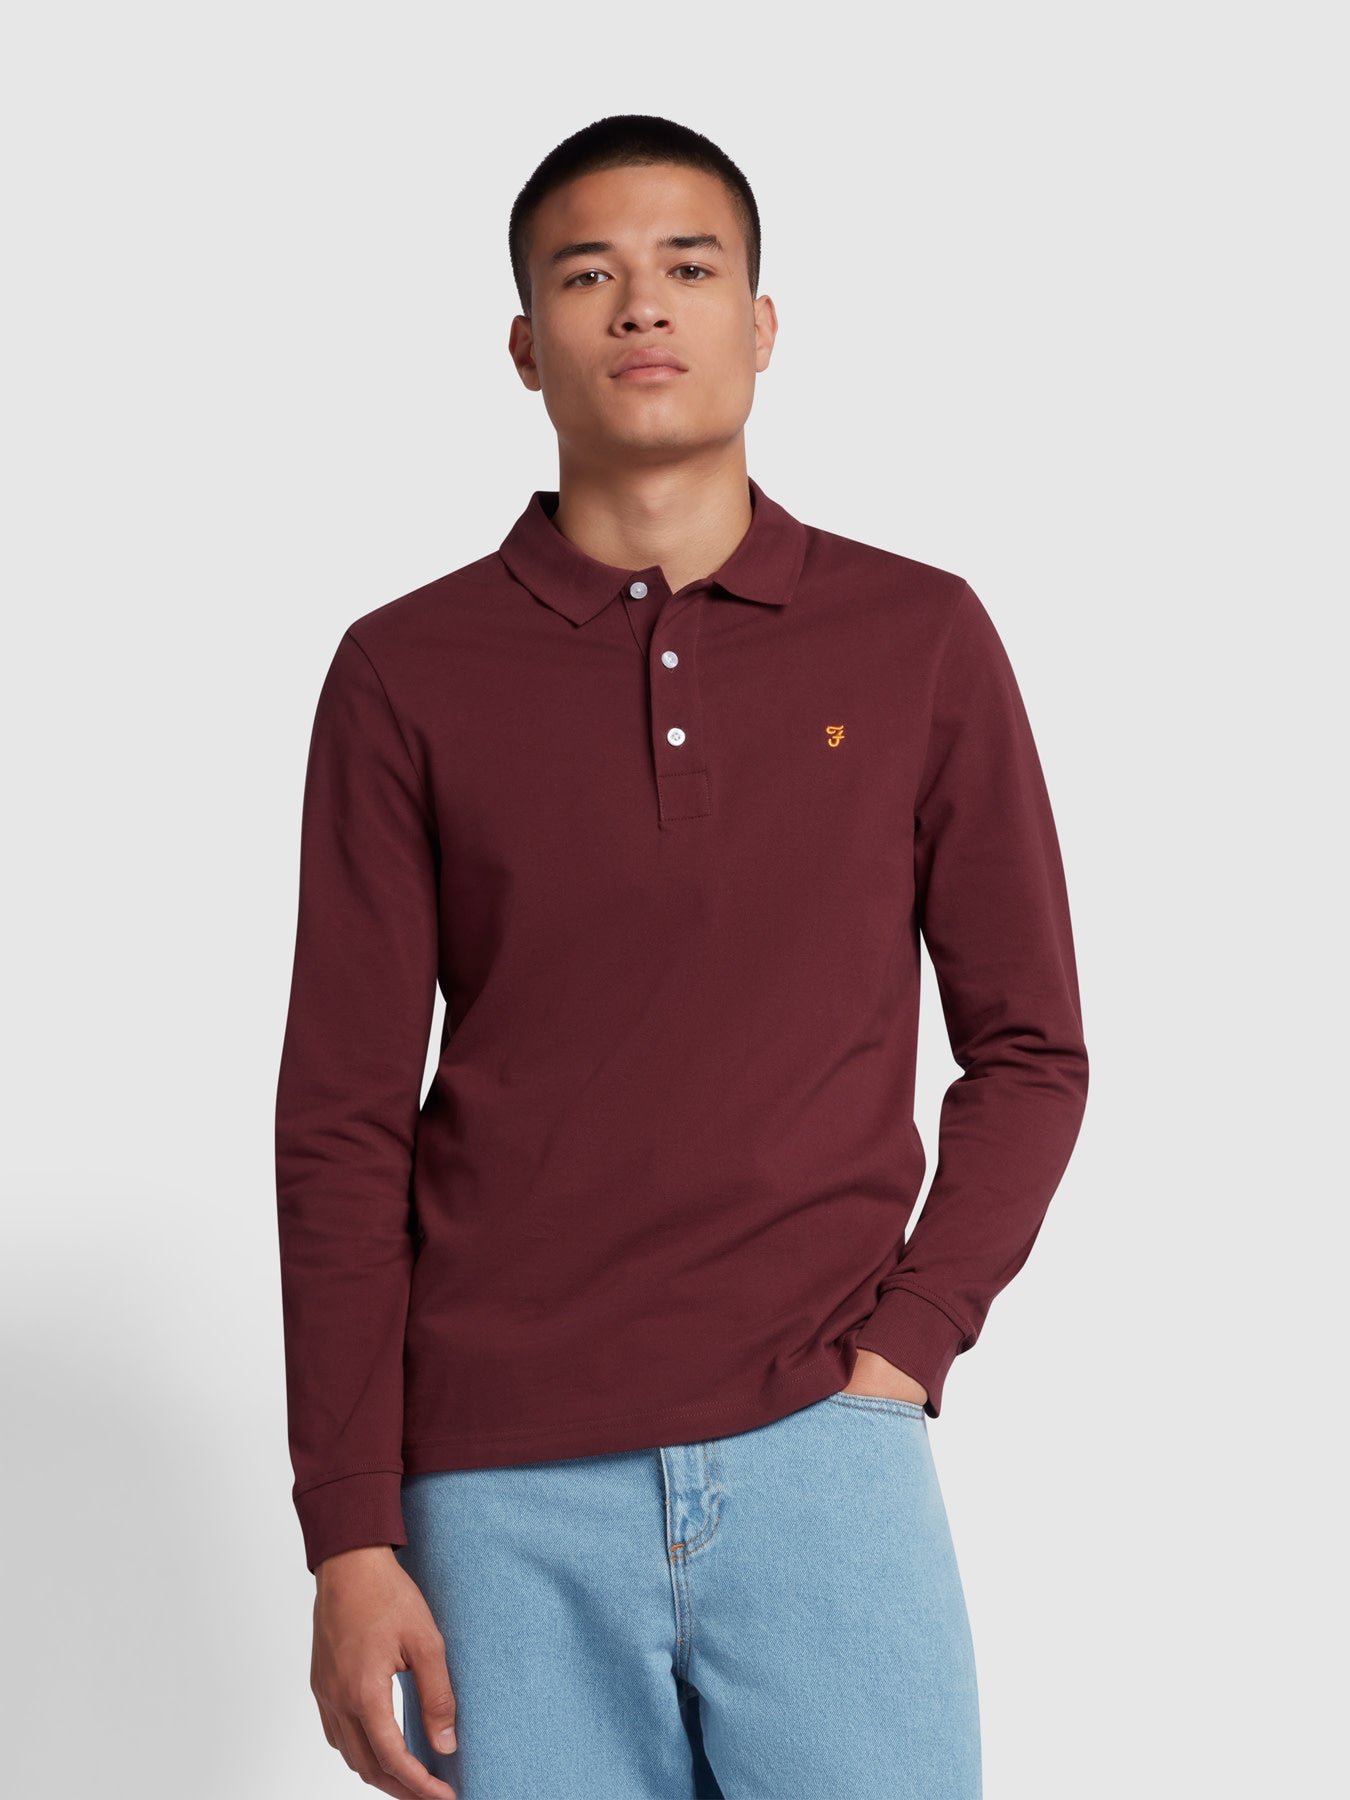 View Blanes Organic Cotton Long Sleeve Polo Shirt In Farah Red information